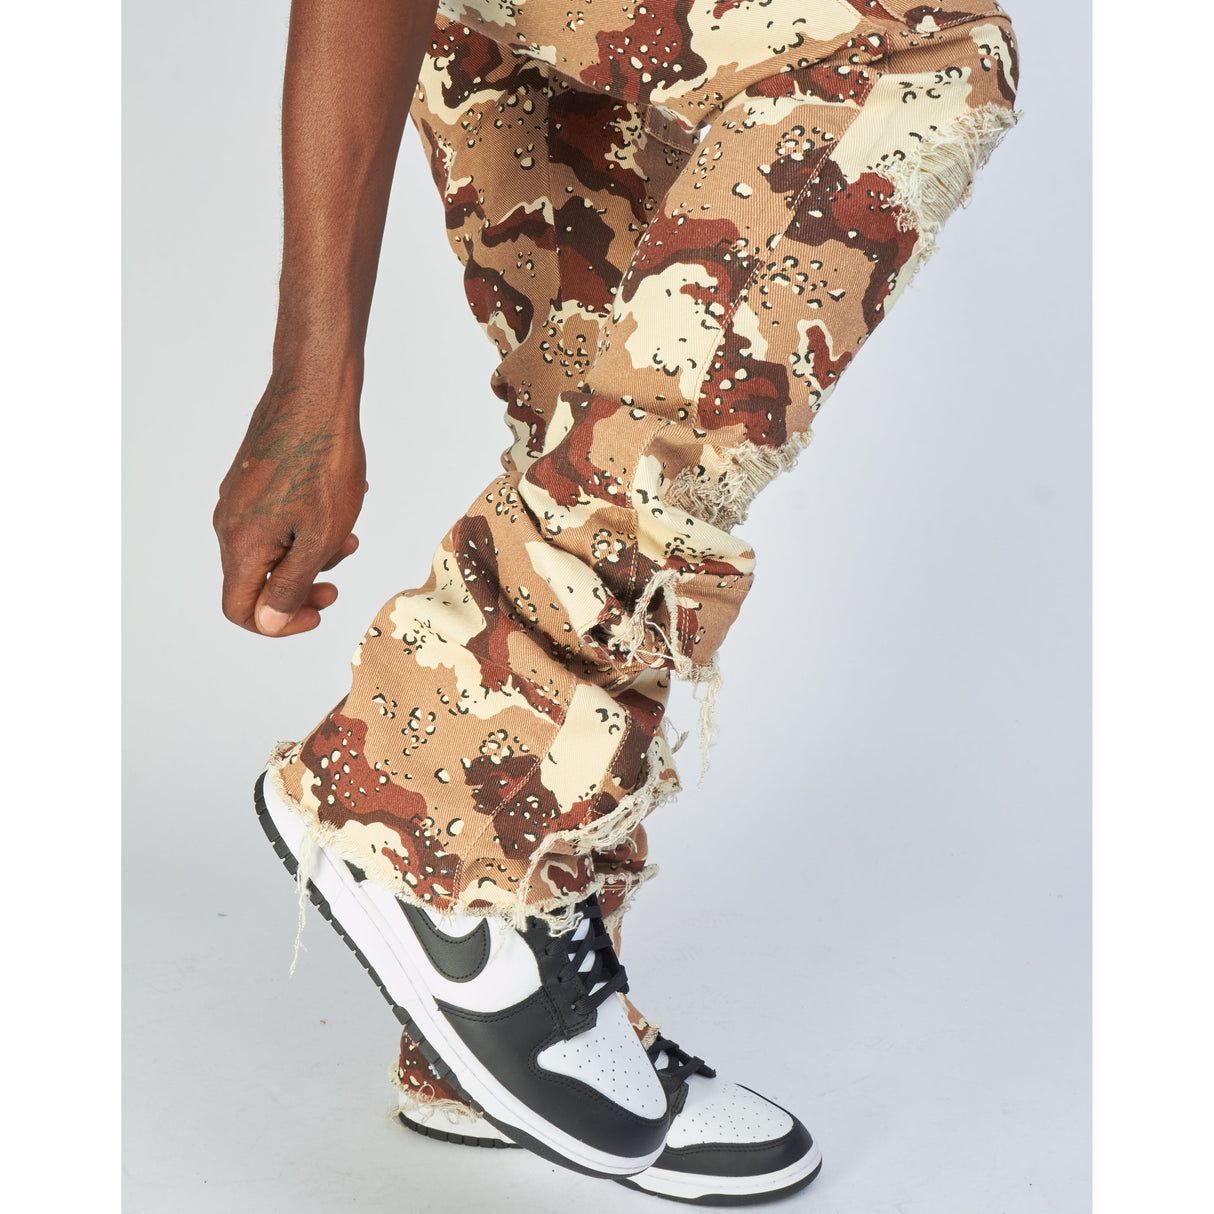 Politics Jeans - Marcel - Red Camo - Super Stacked Cargo - 518